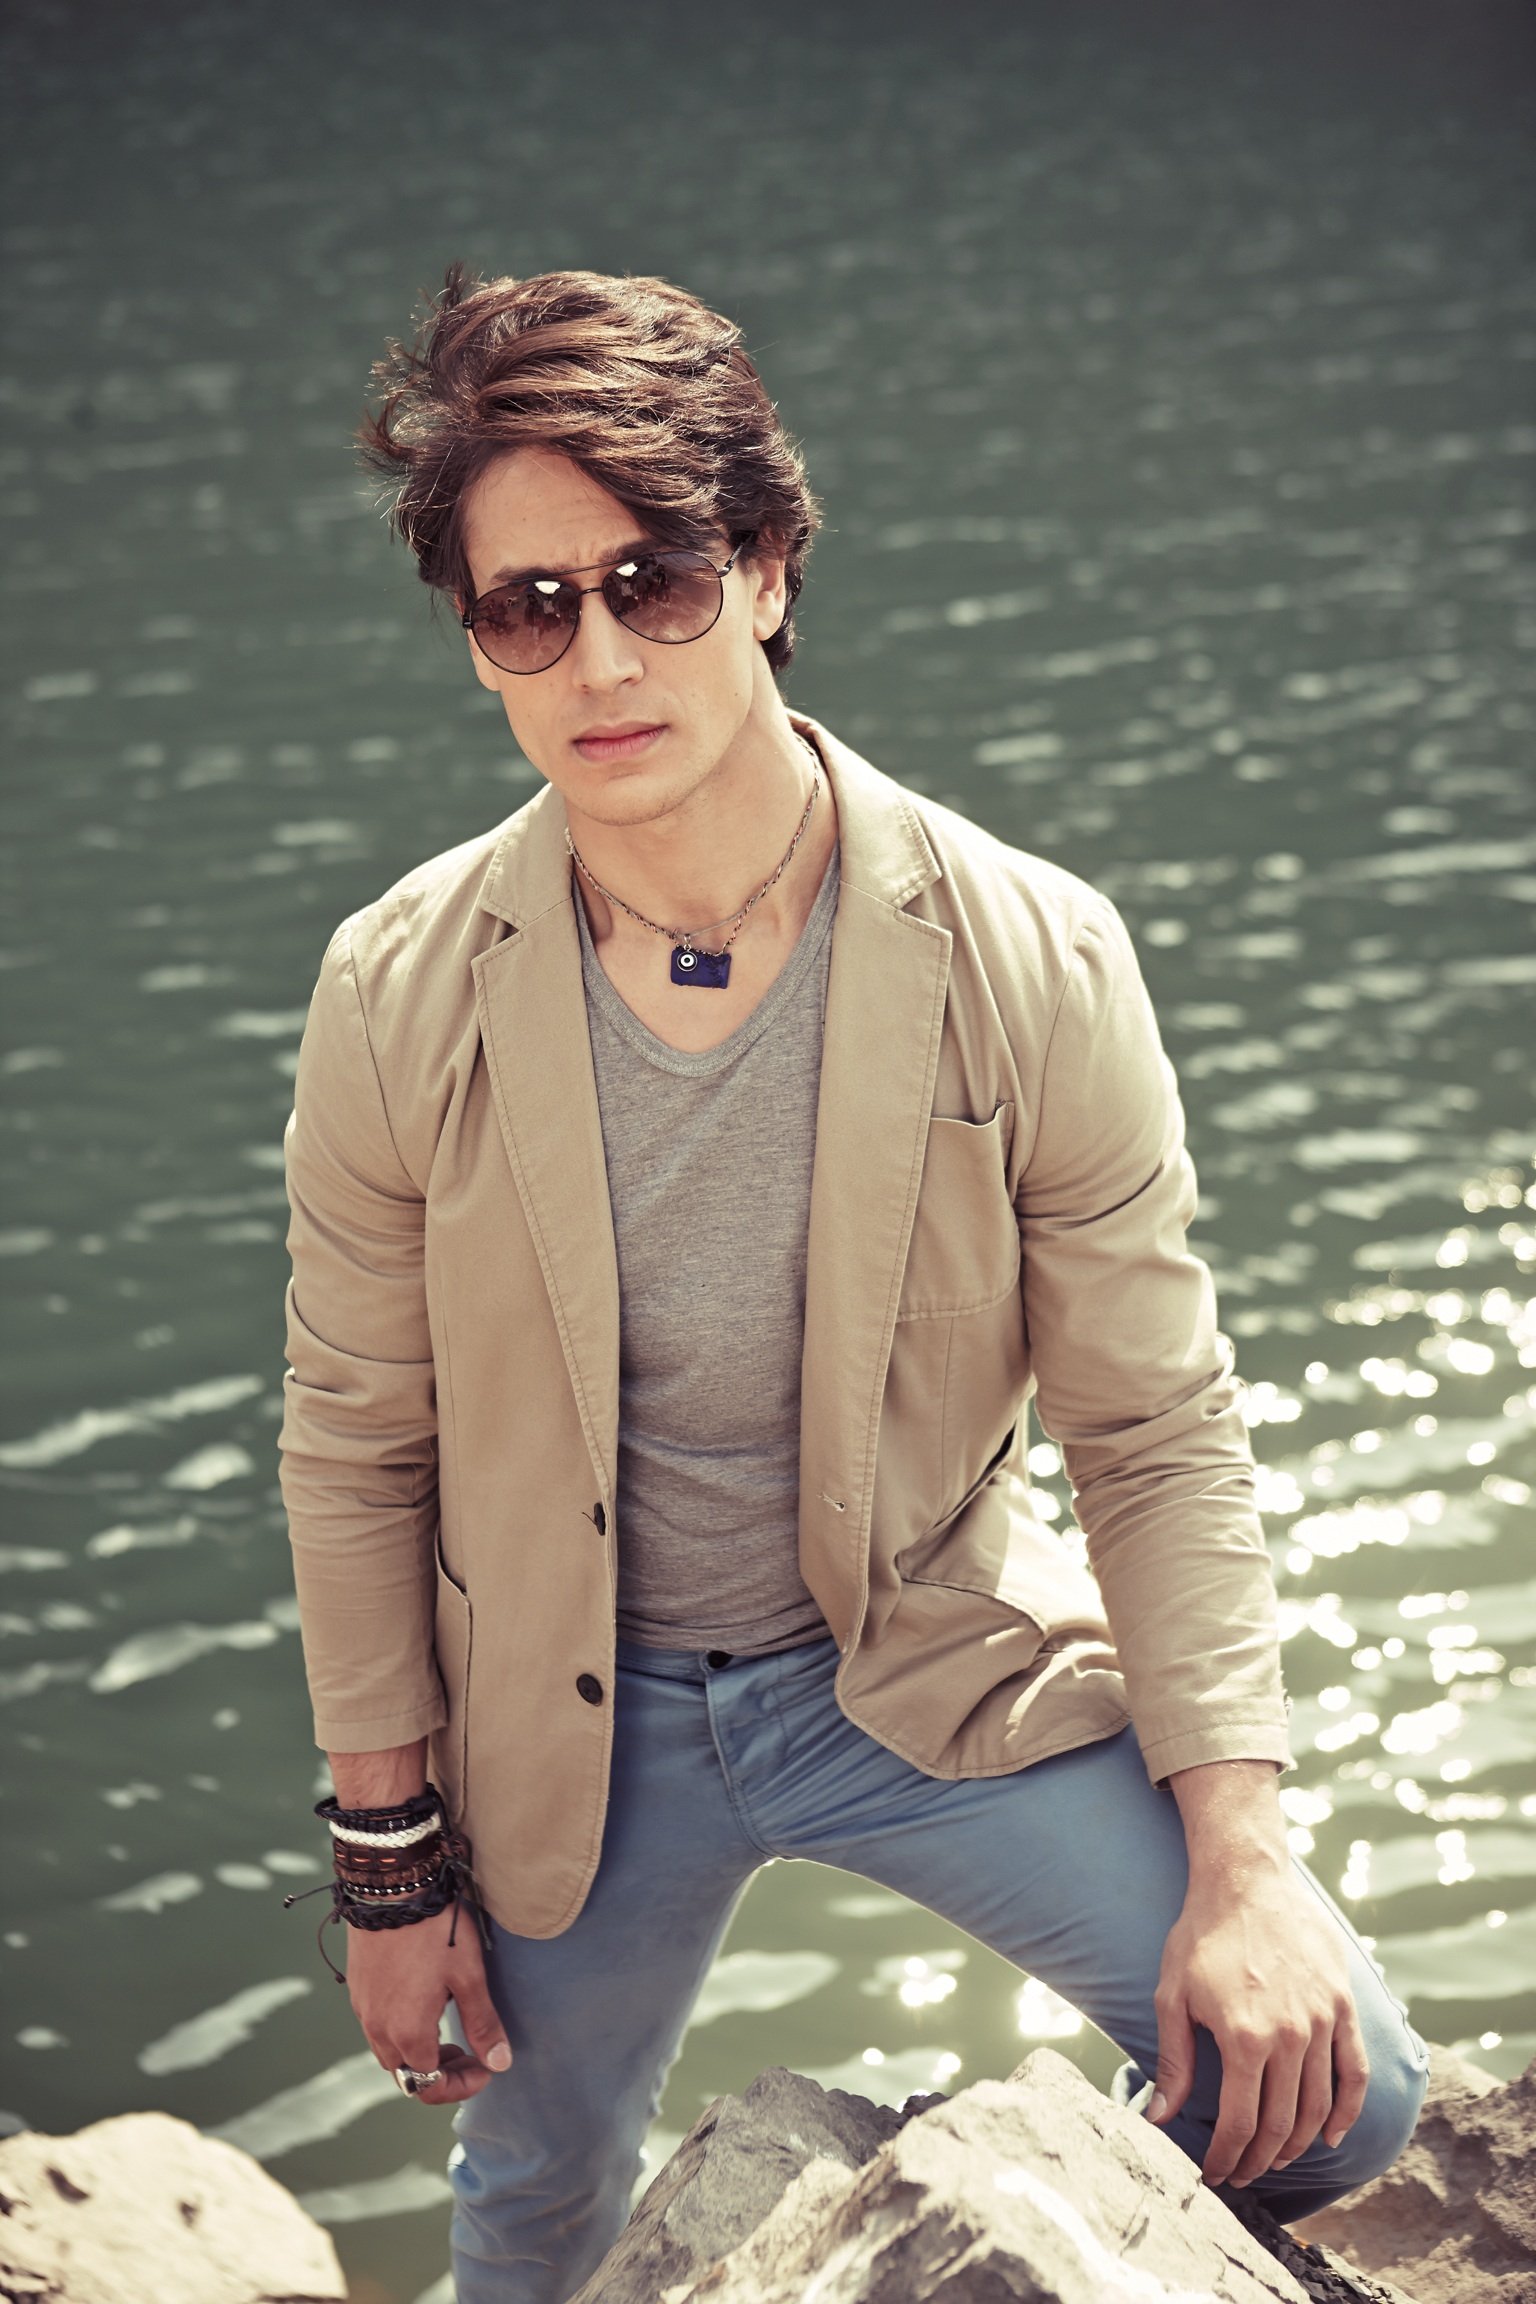 Tiger Shroff Pictures, Images - Page 2